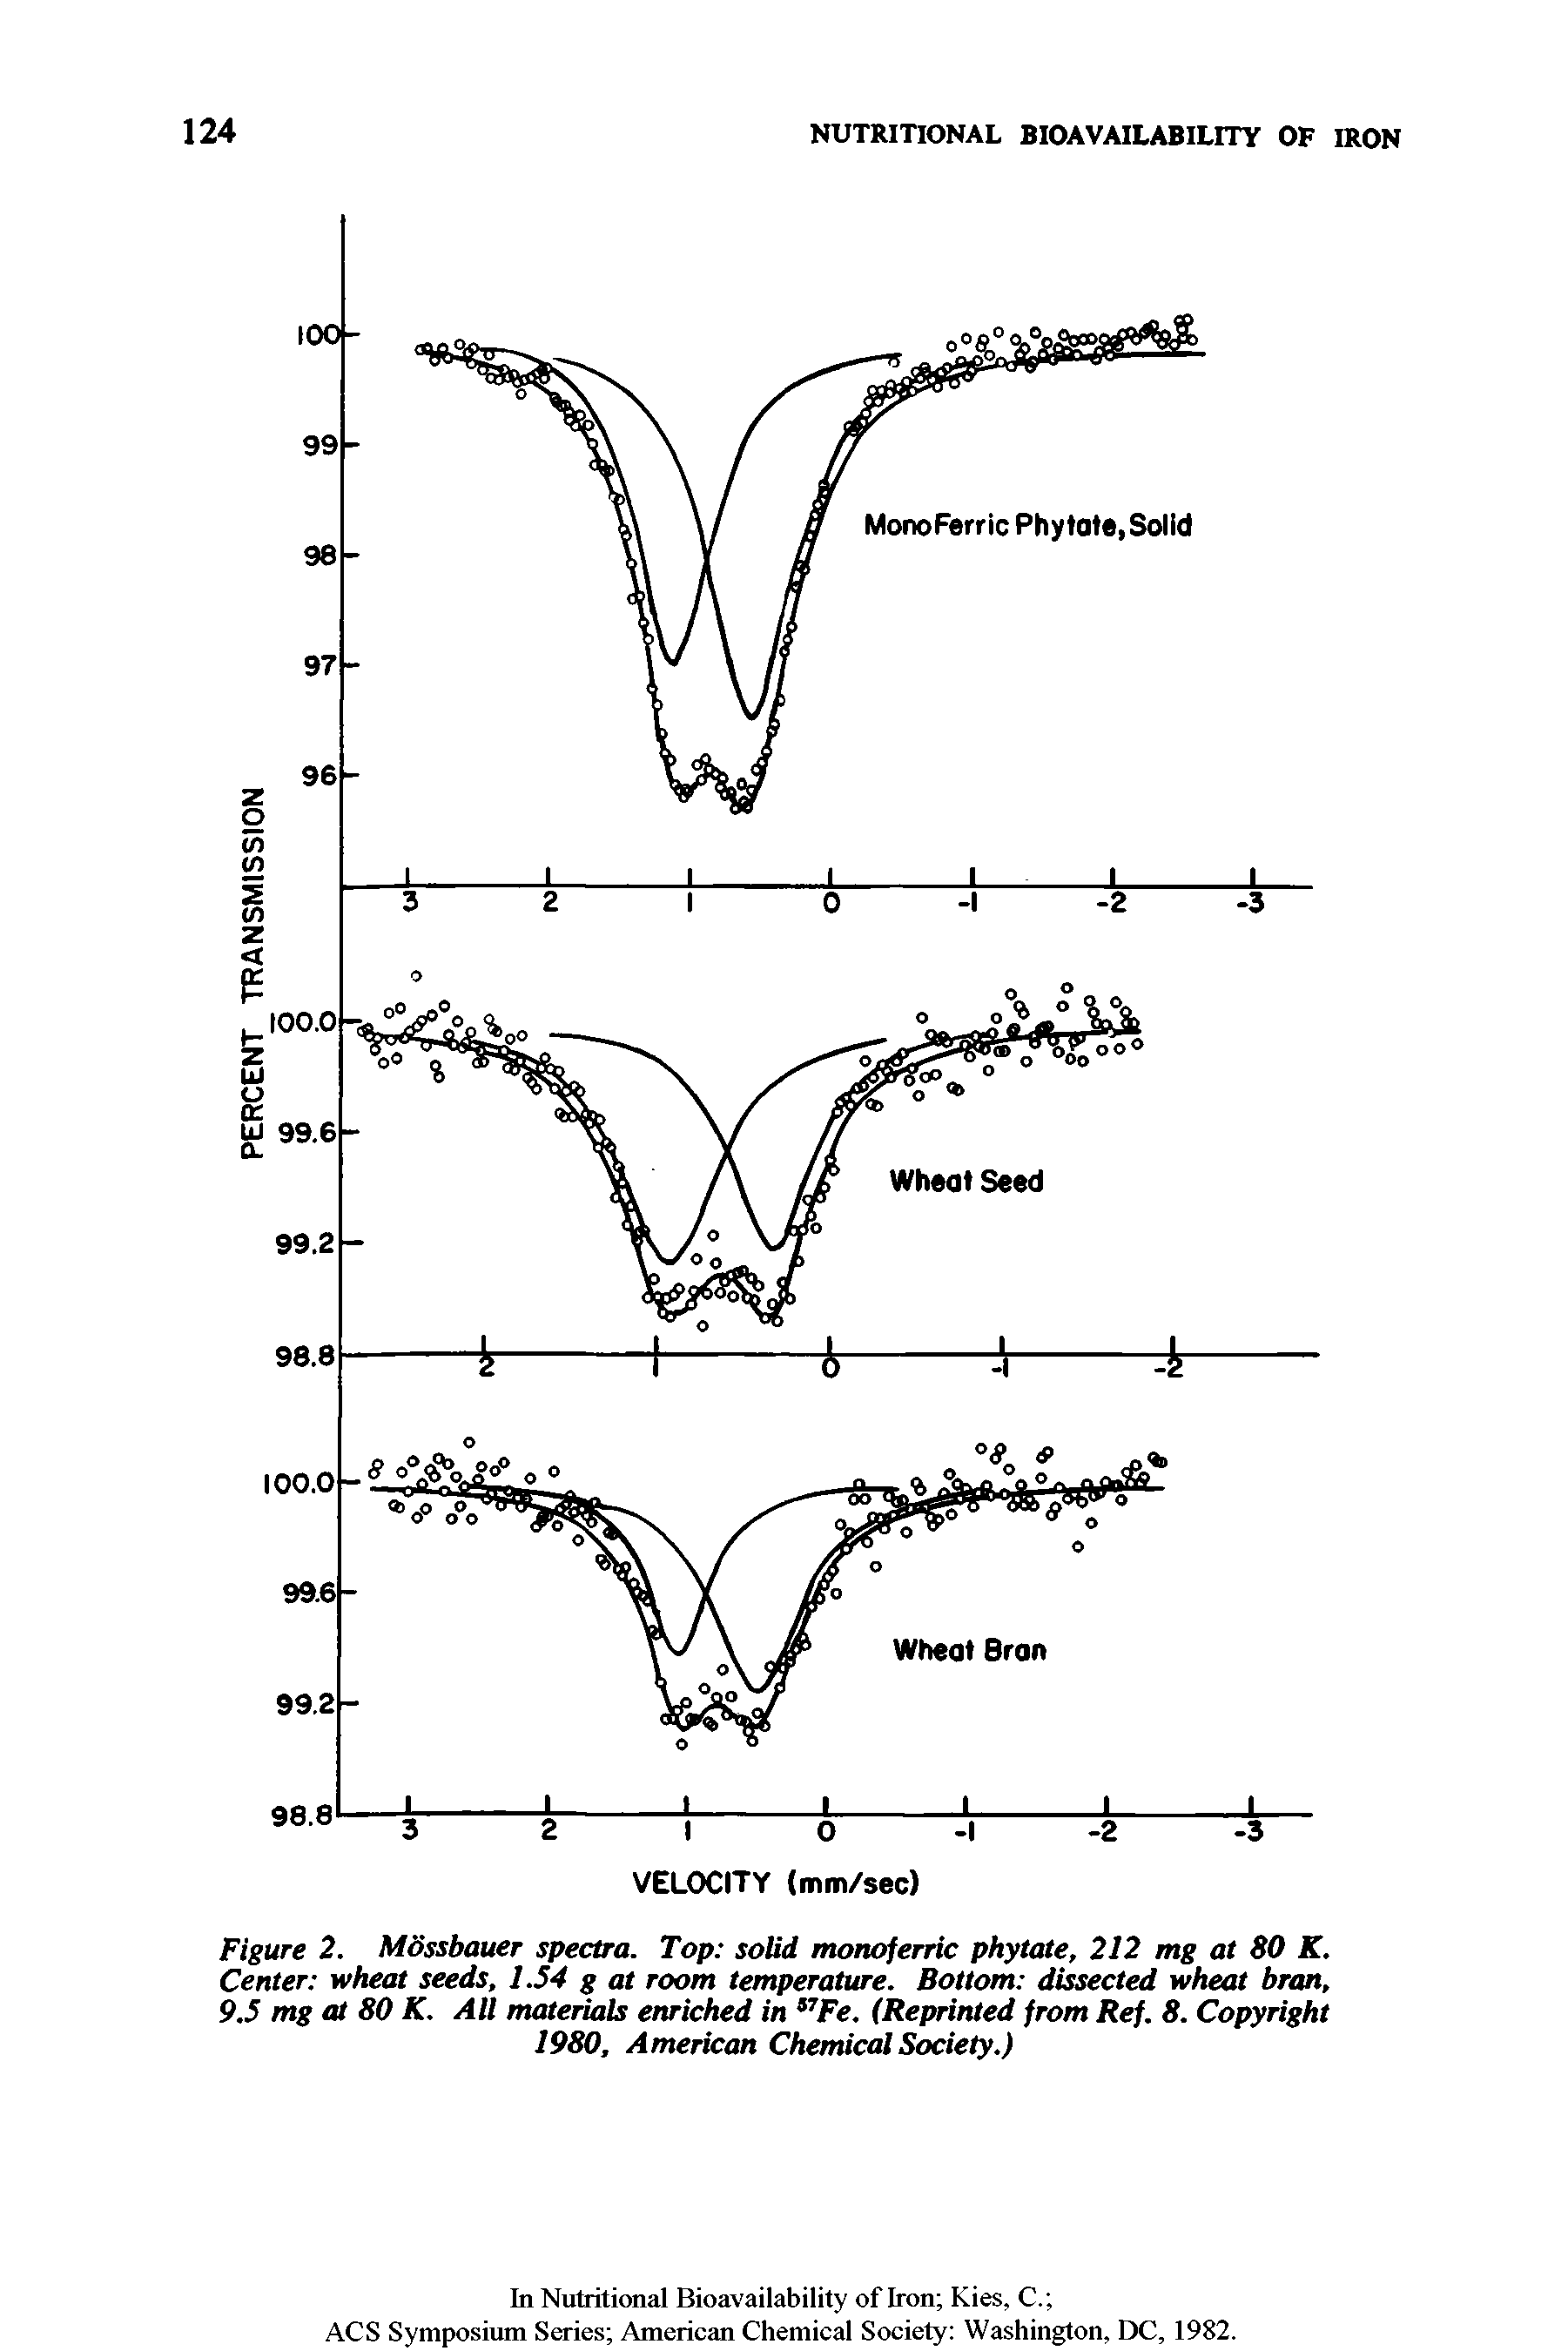 Figure 2. Mossbauer spectra. Top solid monoferric phytate, 212 mg at 80 K. Center wheat seeds, 1.54 g at room temperature. Bottom dissected wheat bran, 9.5 mg at 80 K. All materials enriched in 17Fe. (Reprinted from Ref. 8. Copyright 1980, American Chemical Society.)...